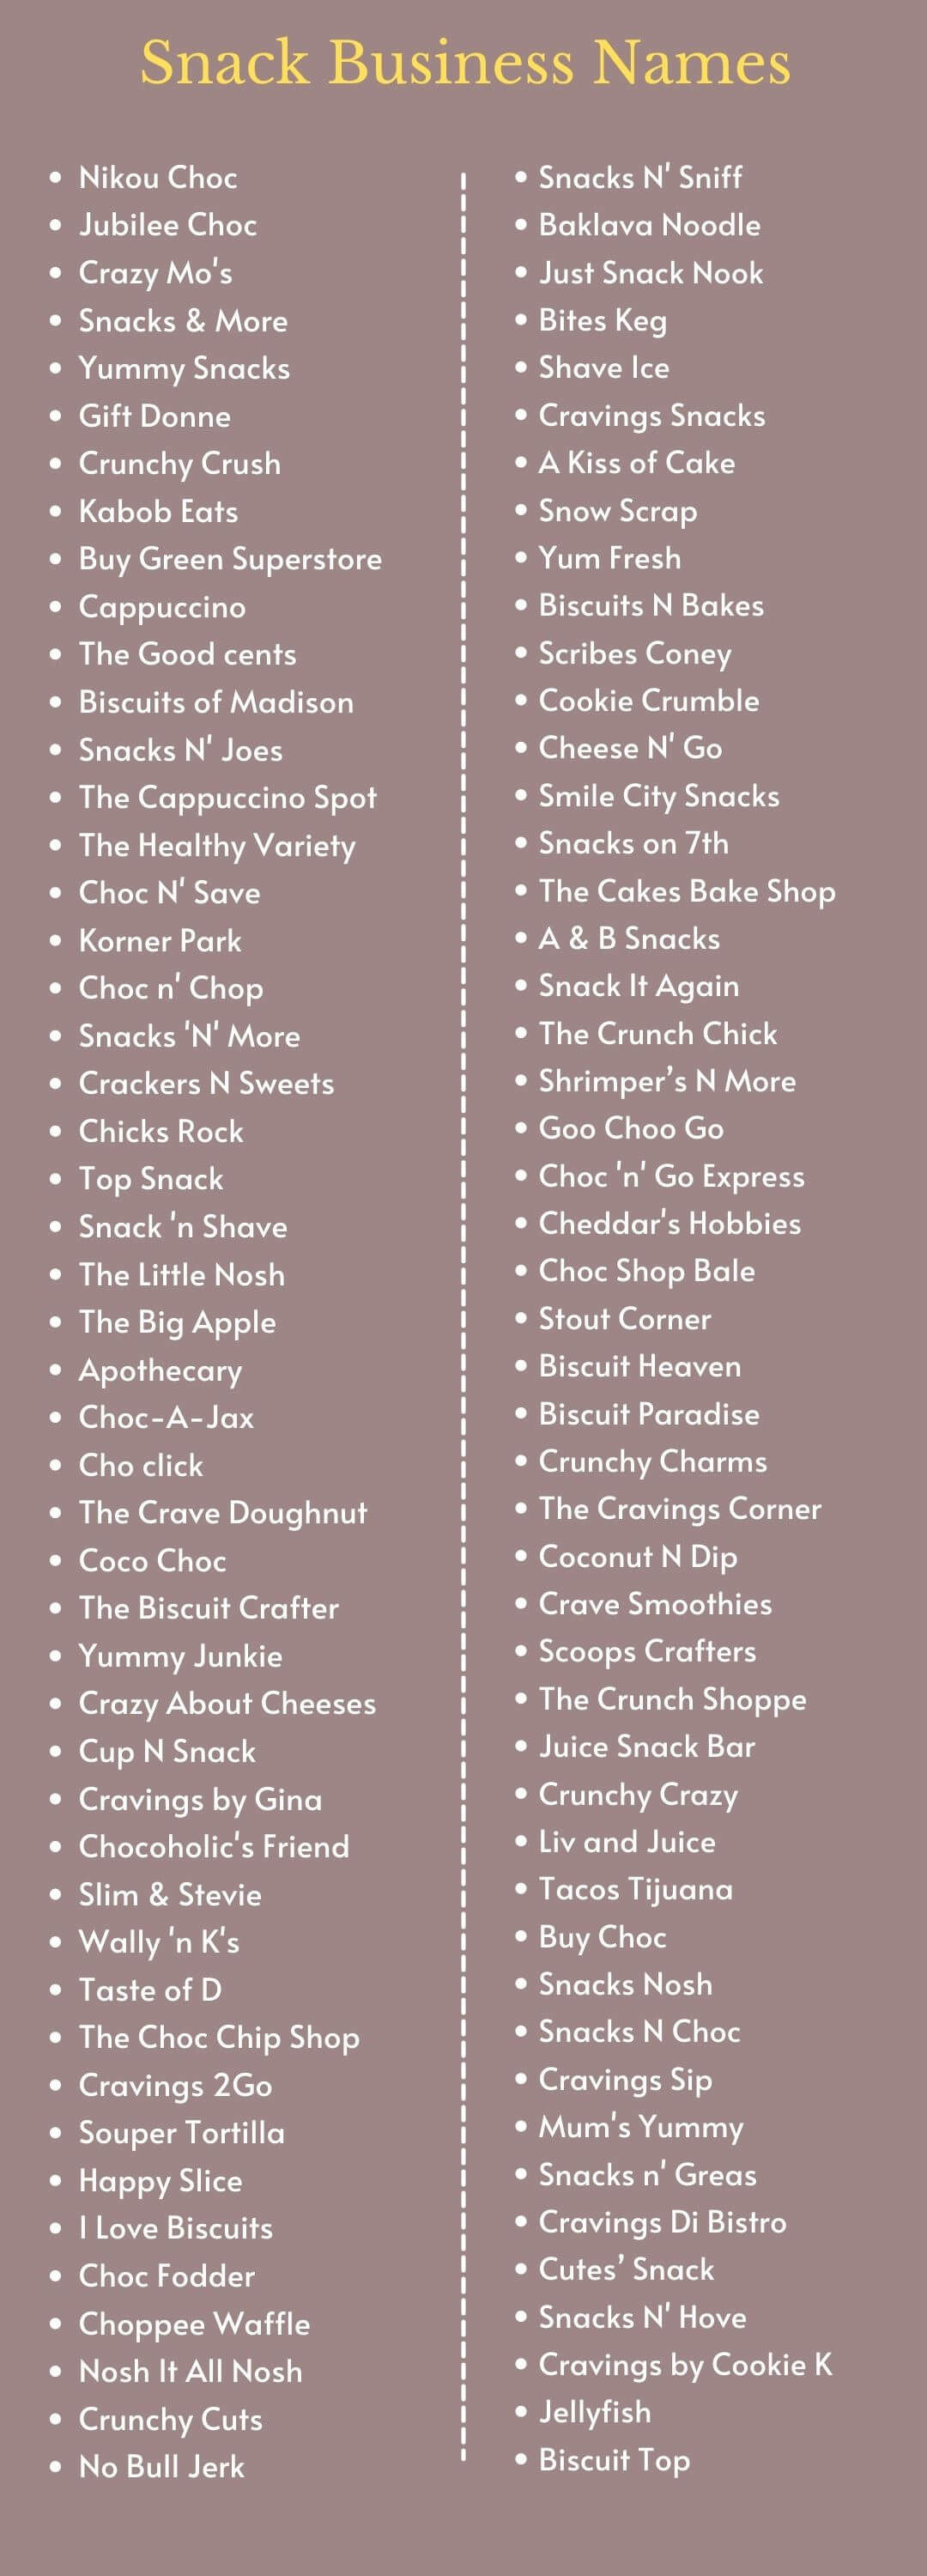 Snack Business Names: infographic